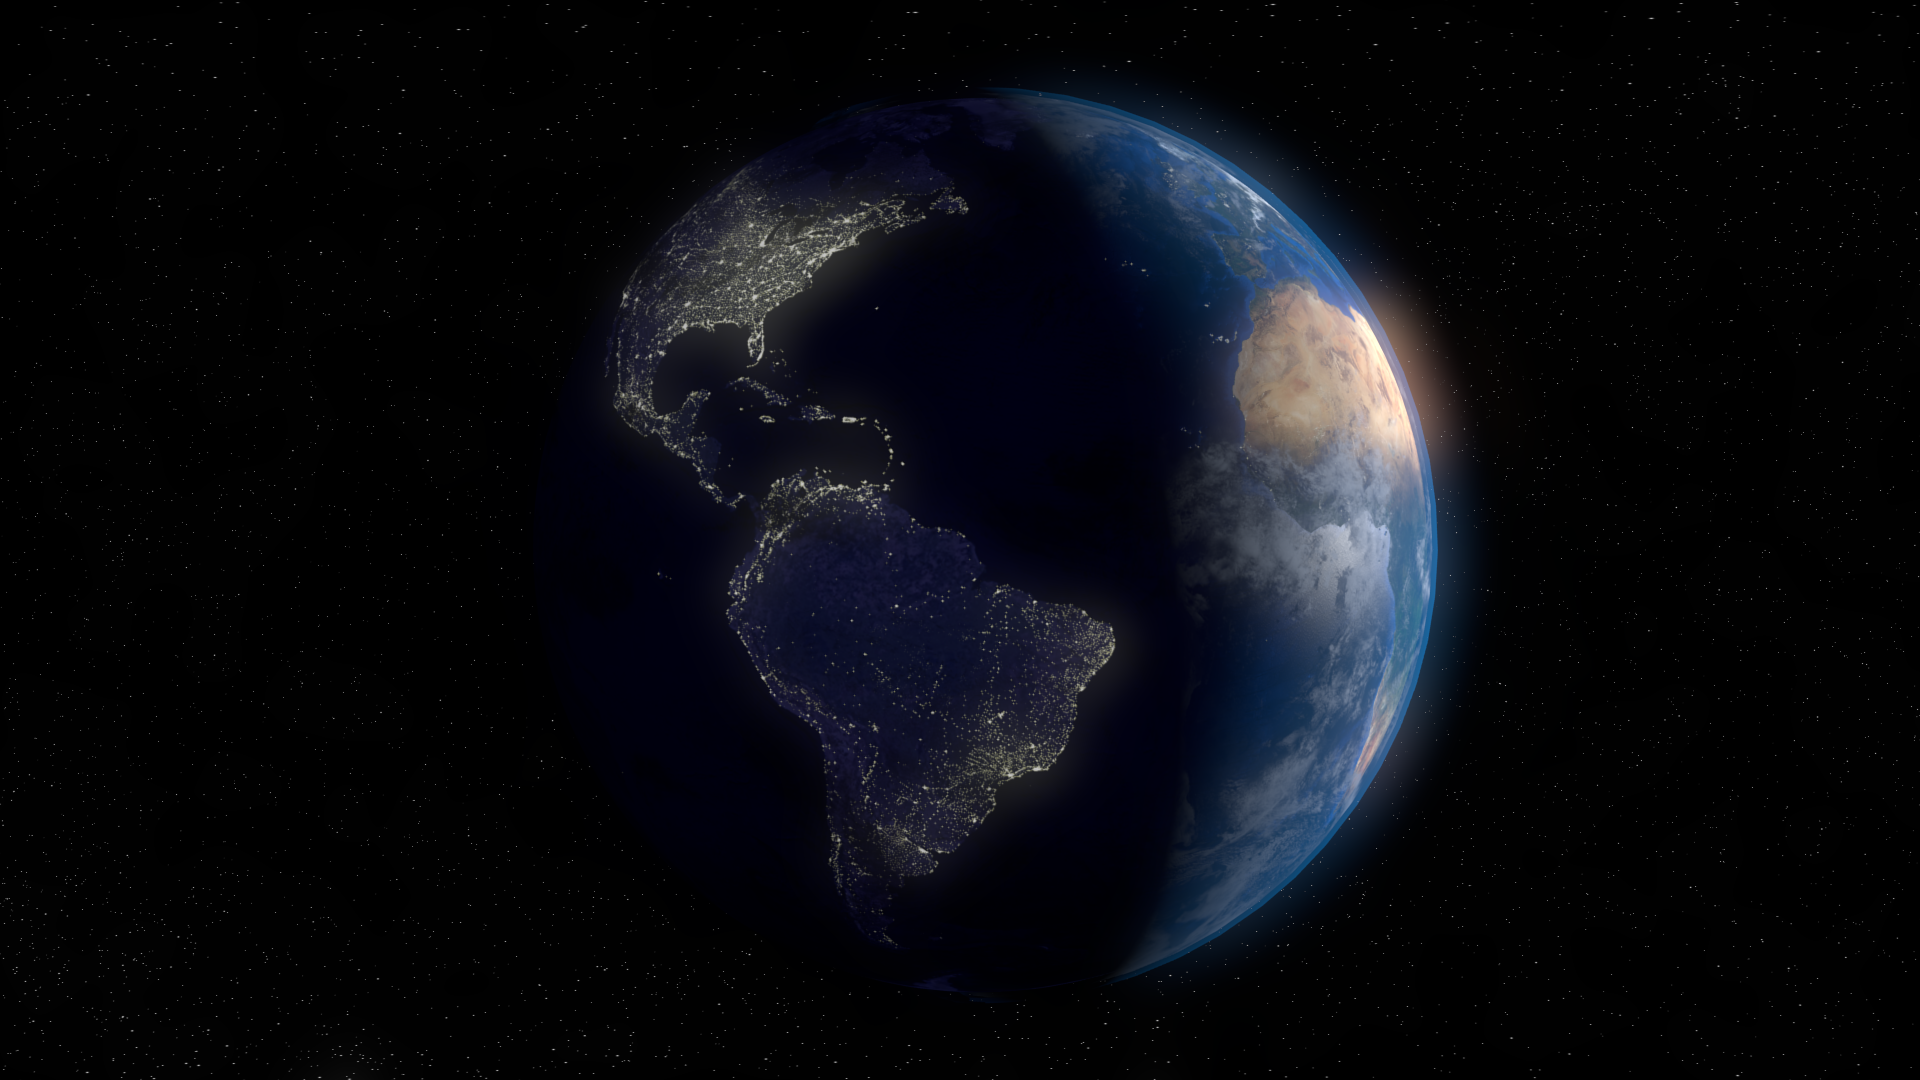 Realistic looking Earth (v 2.0)